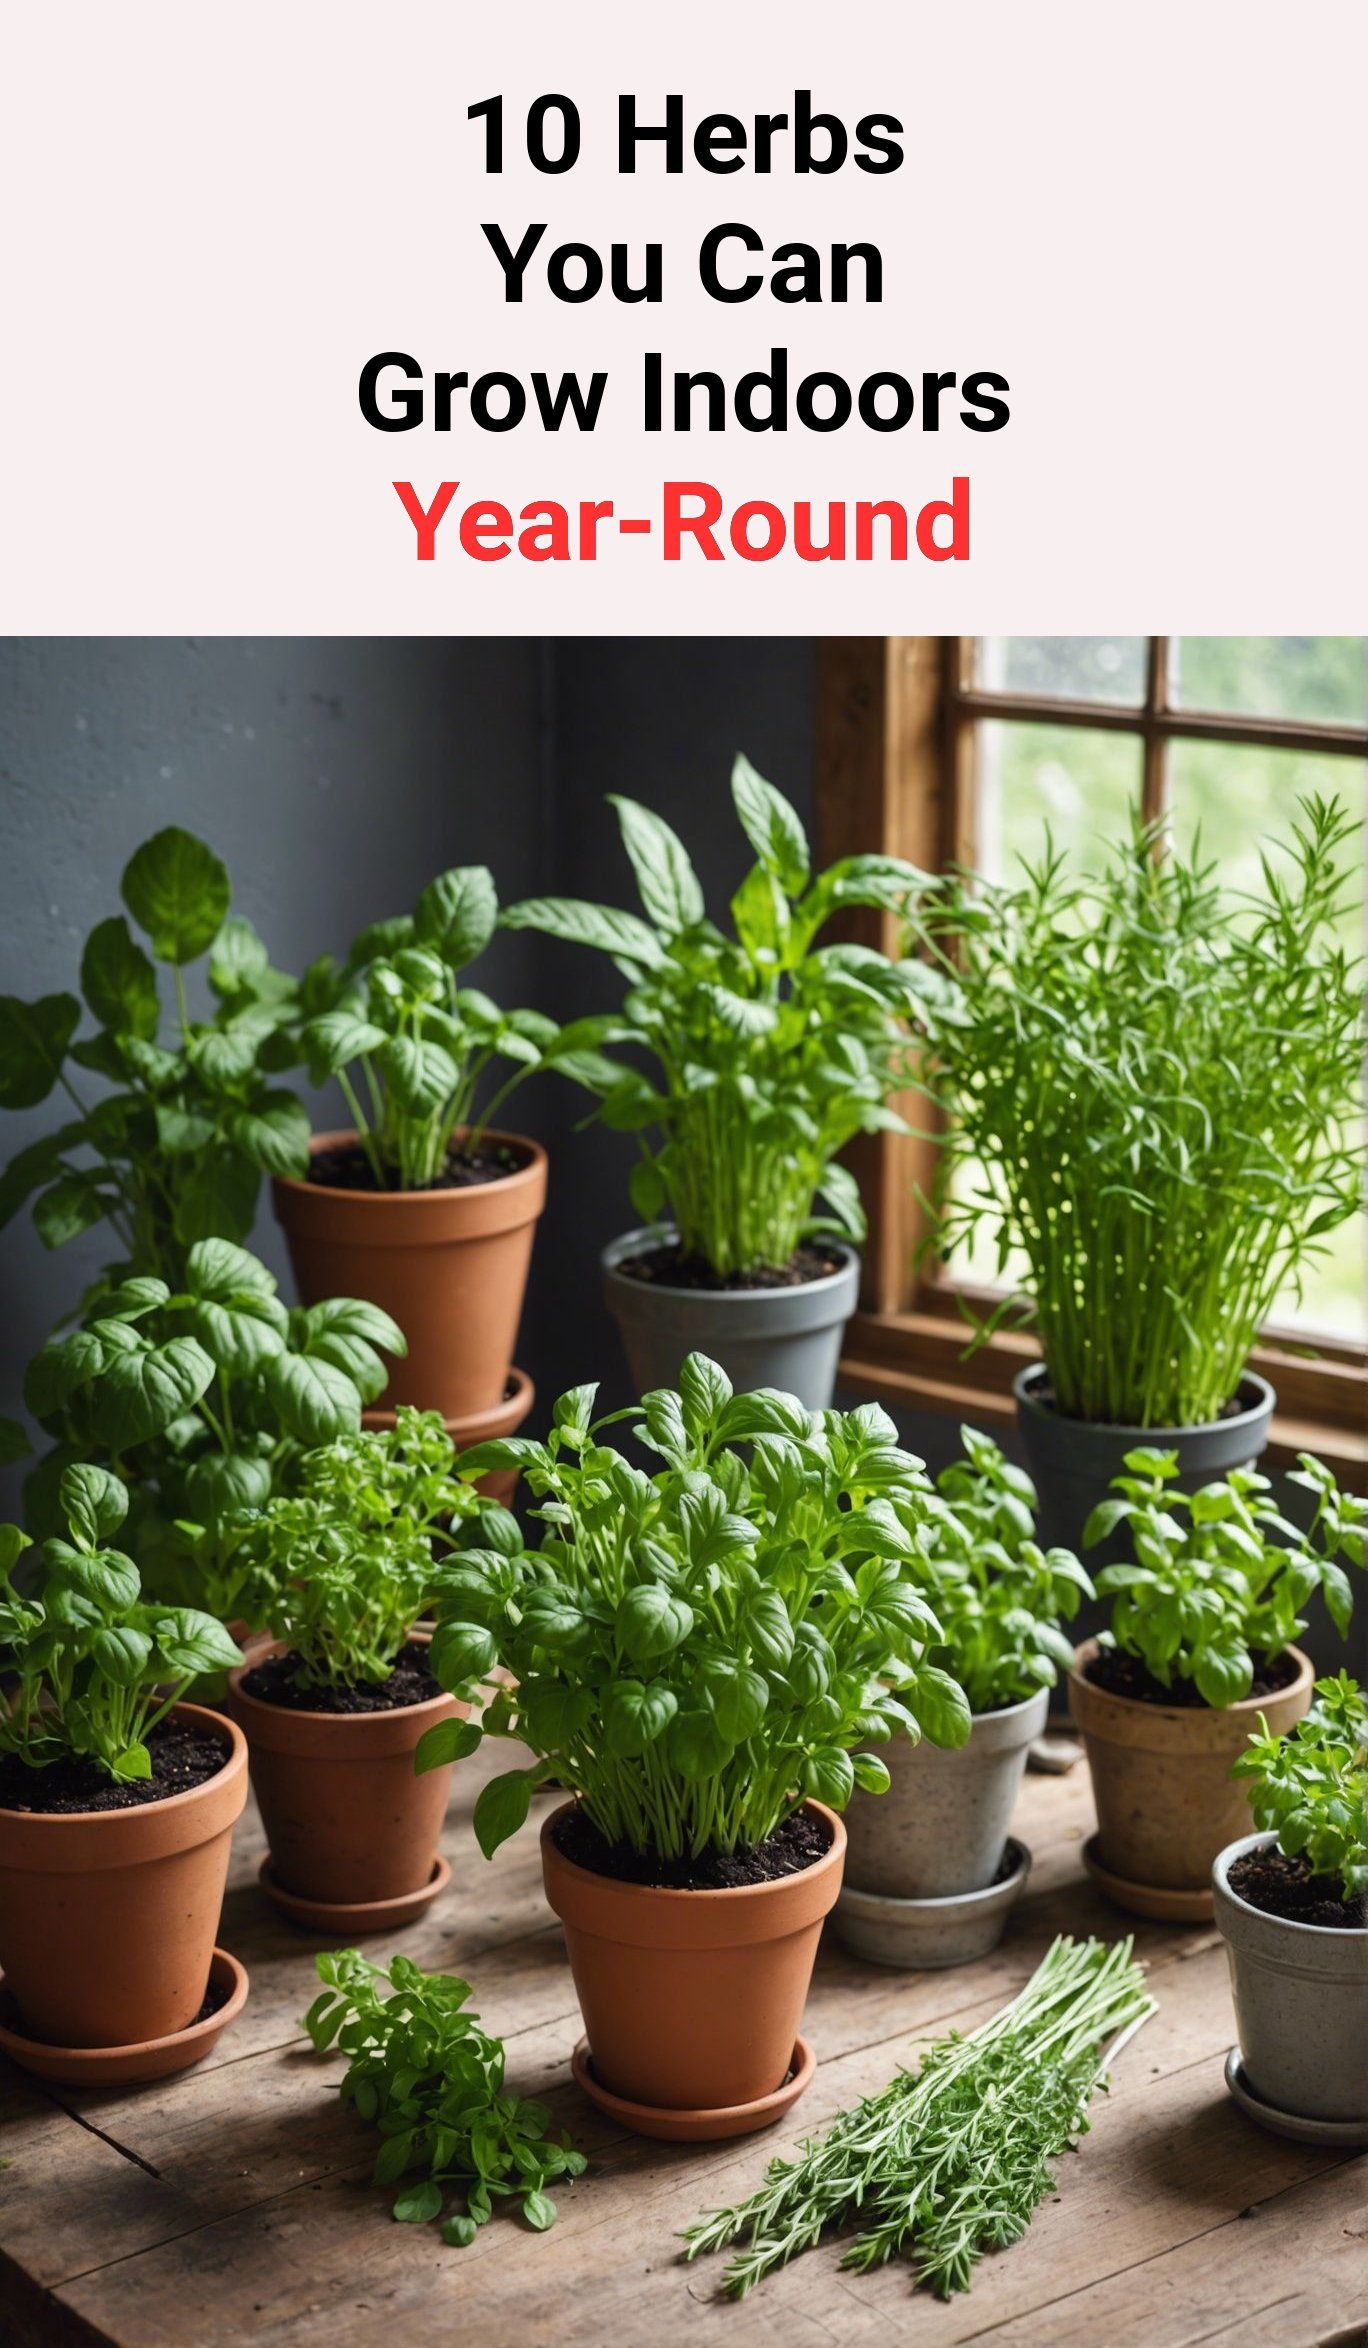 10 Herbs You Can Grow Indoors Year-Round